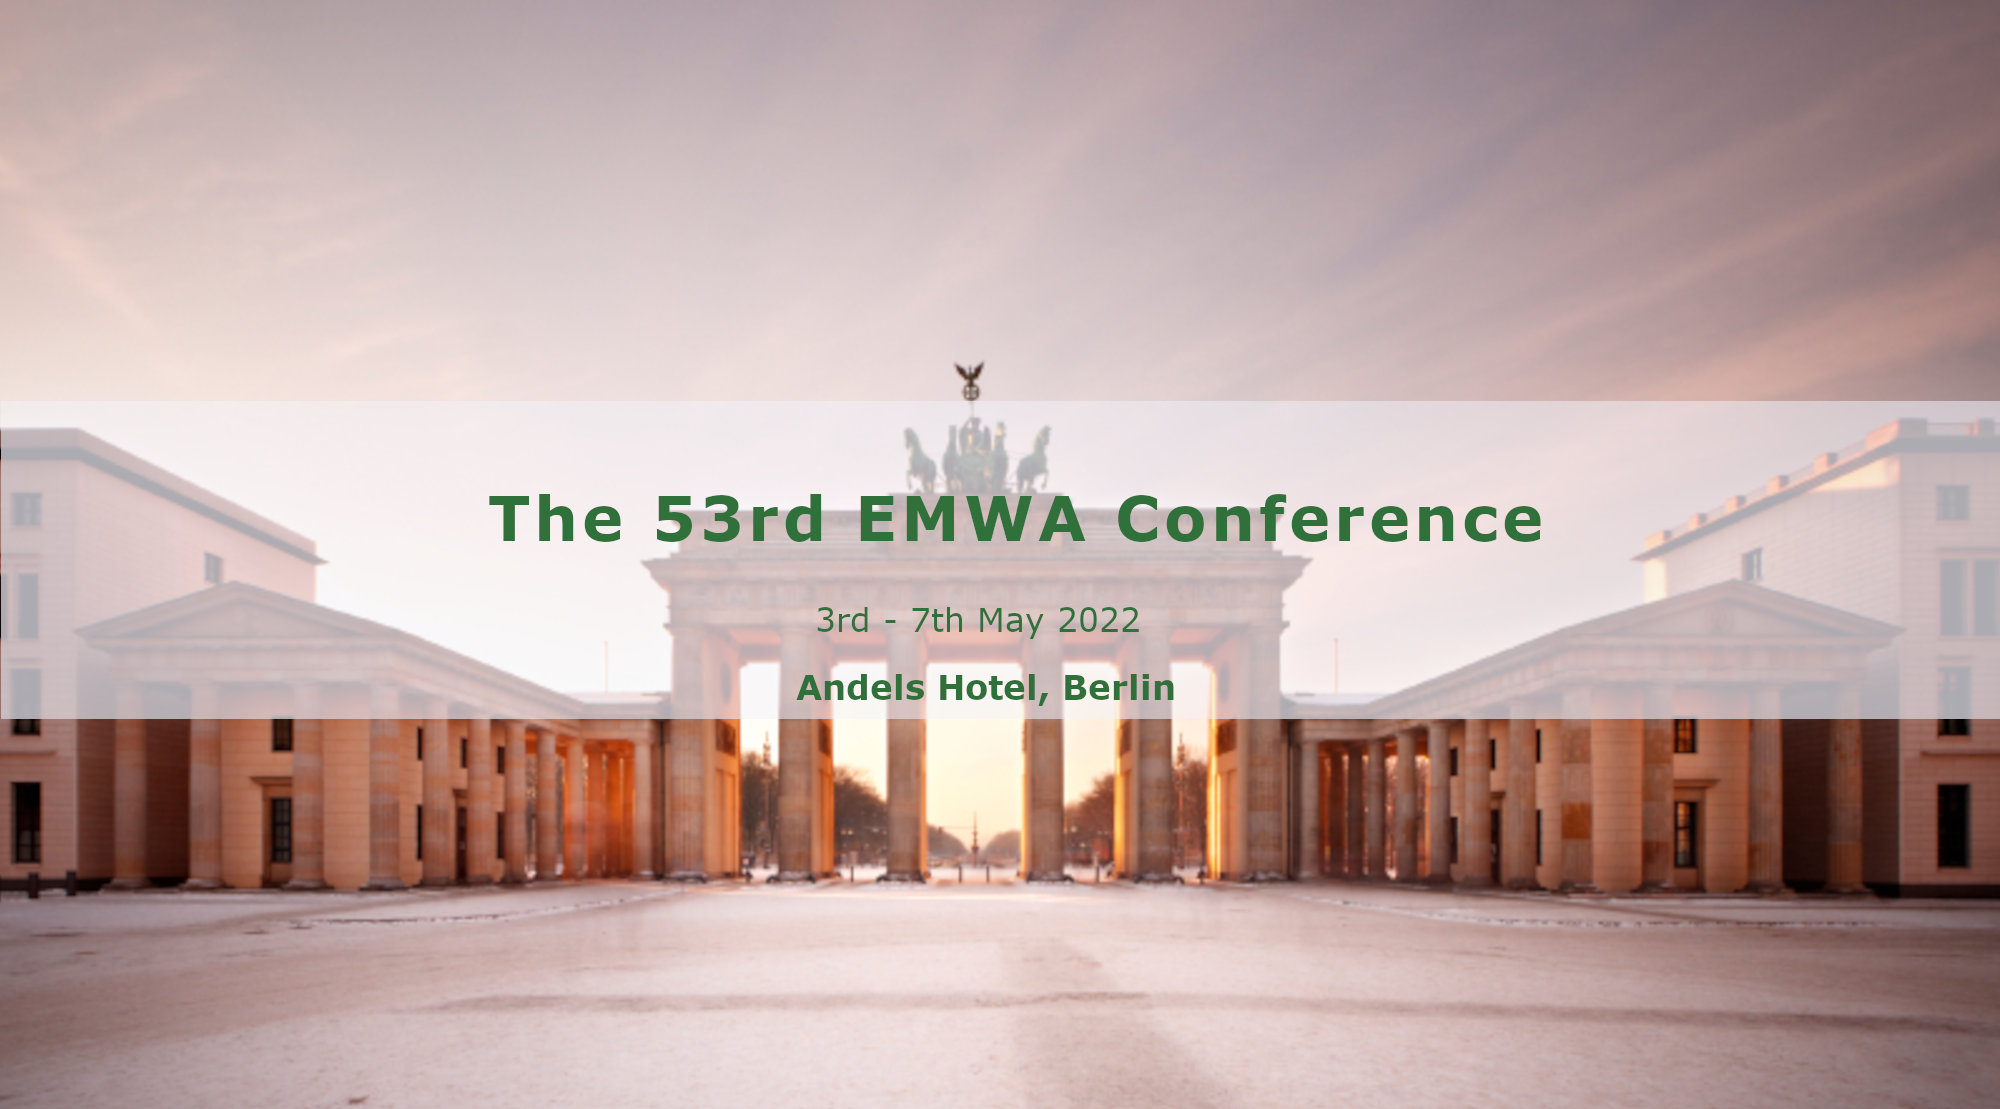 The 53rd EMWA Conference